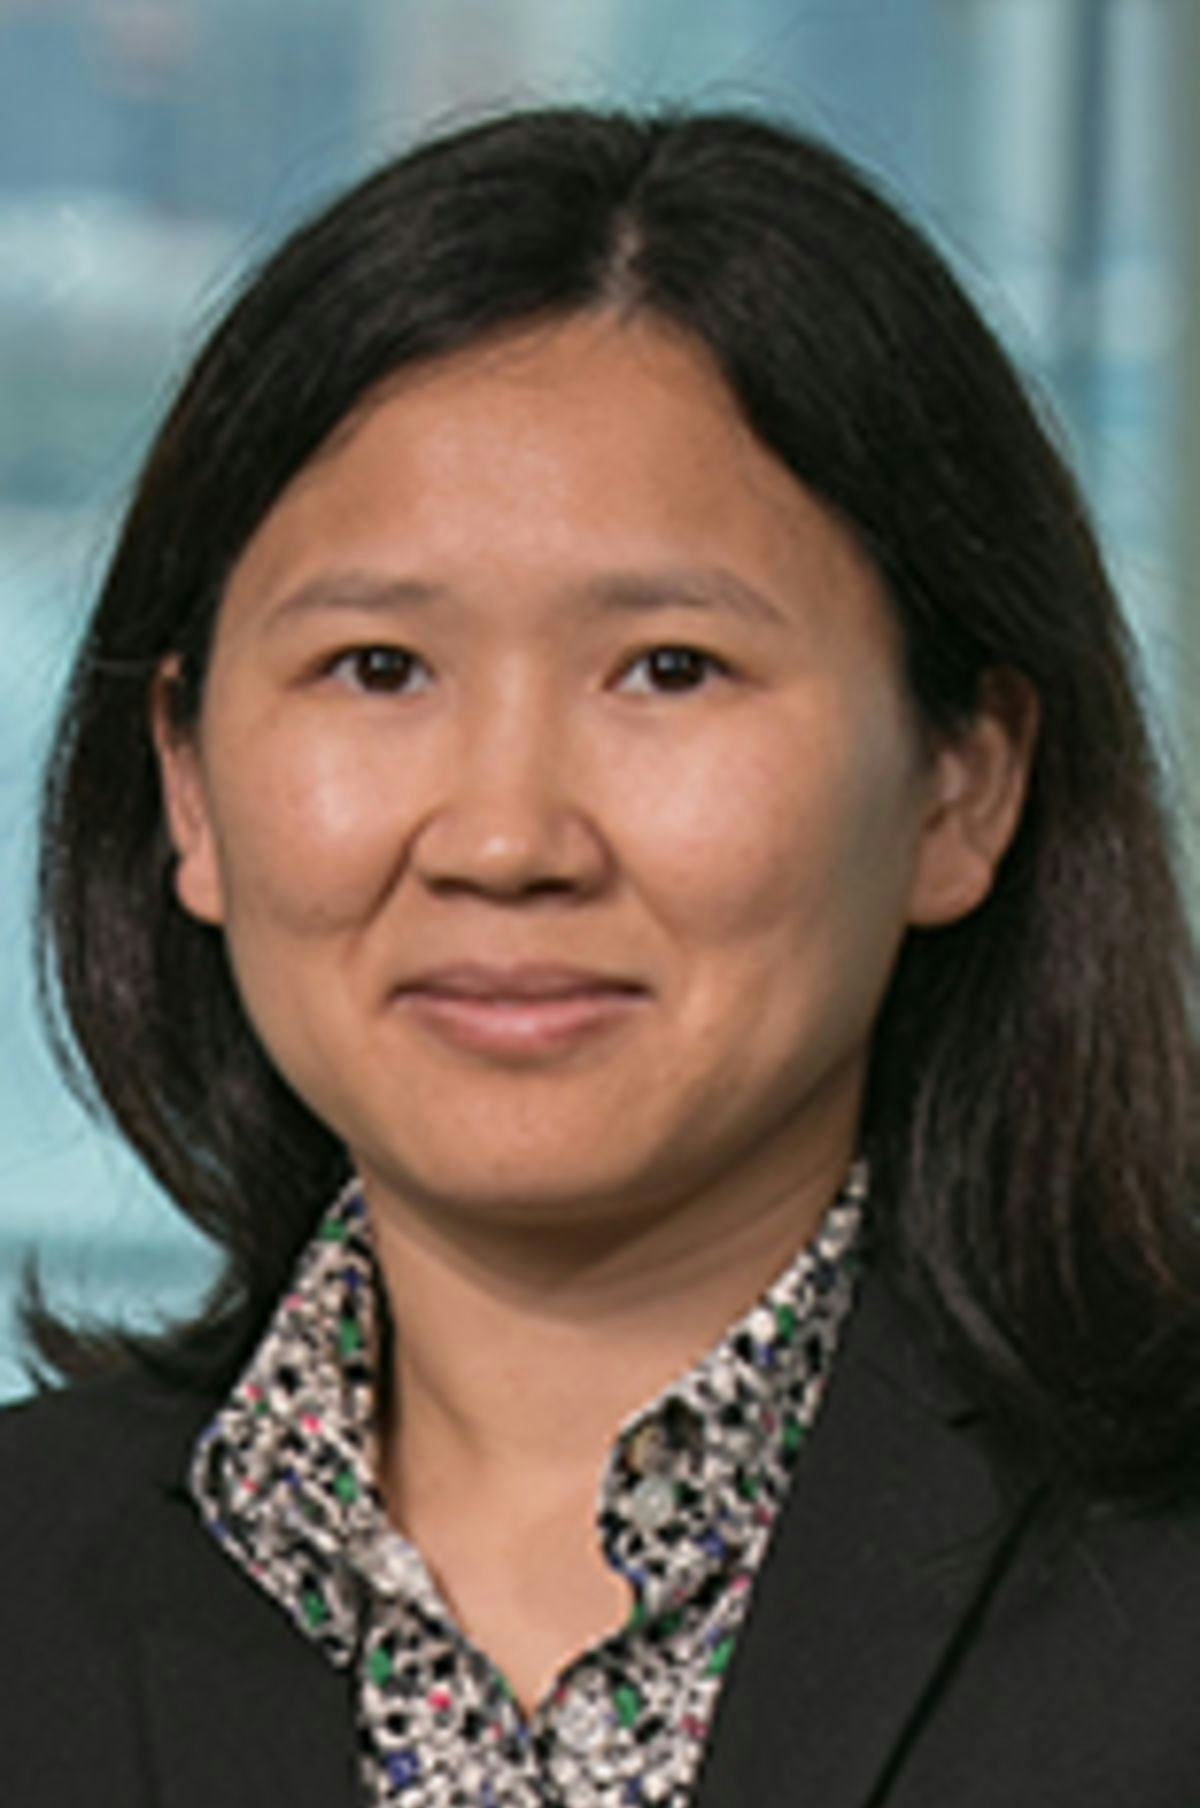 Headshot of Dr. Emily Liu with the New York City skyline in the background.